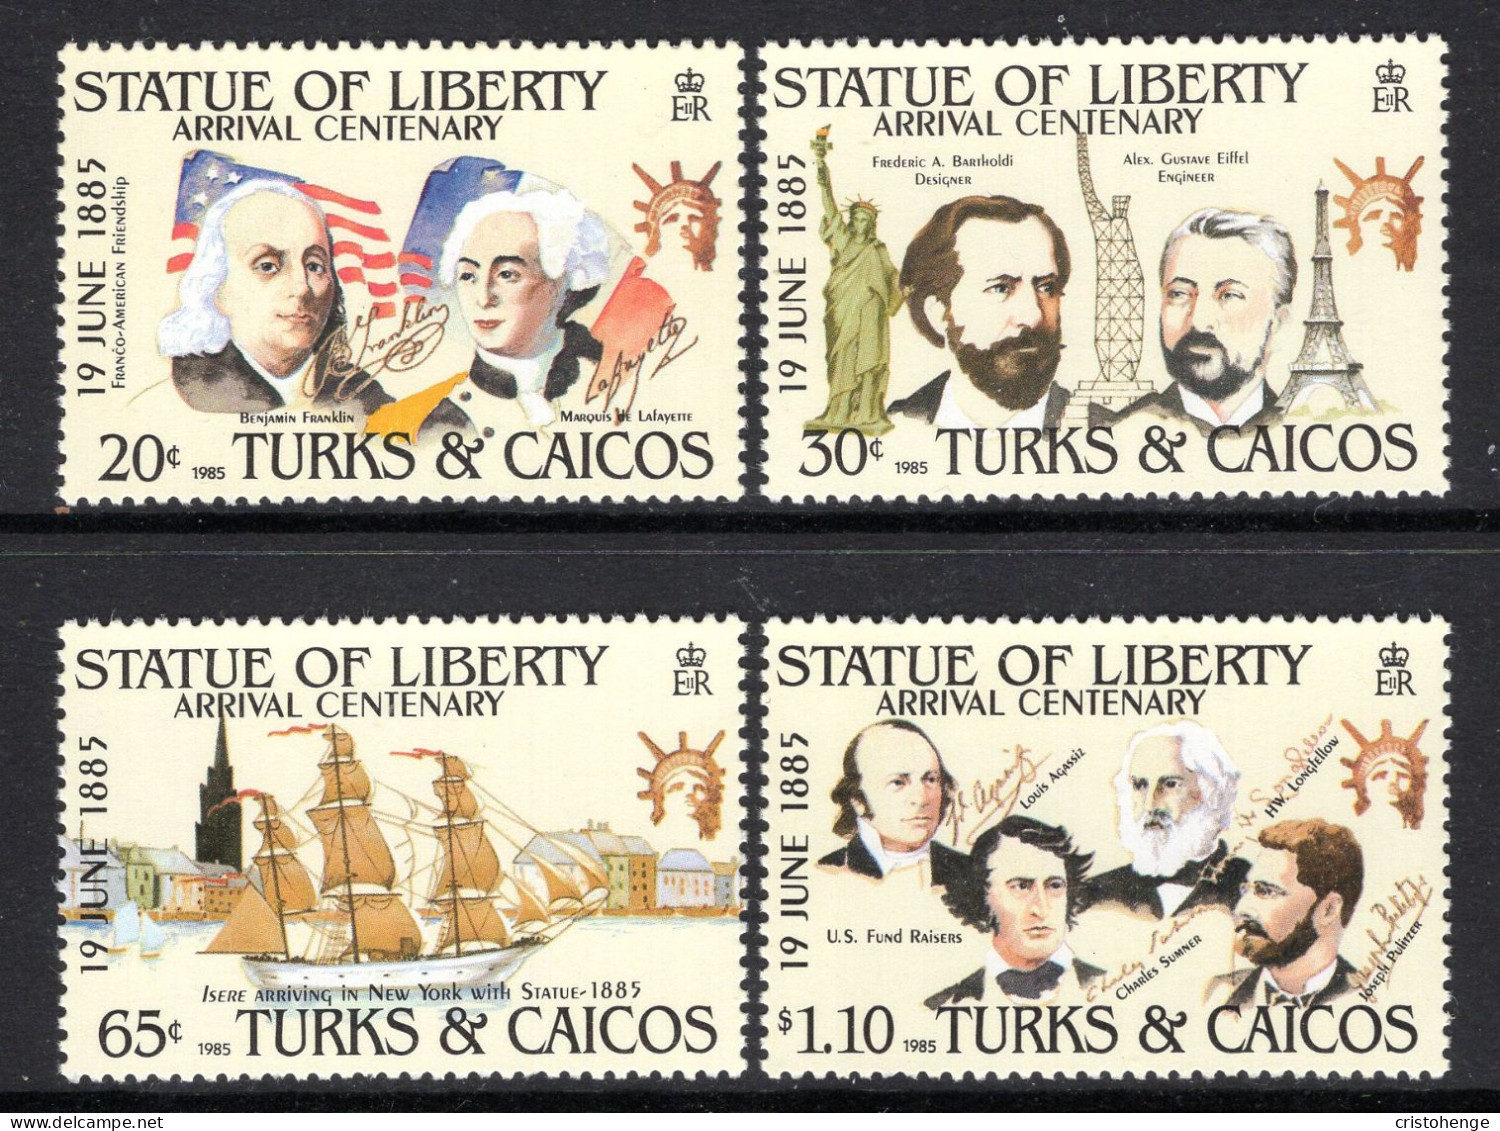 Turks & Caicos Islands 1985 Centenary Of Statue Of Liberty's Arrival In New York Set MNH (SG 839-842) - Turks And Caicos